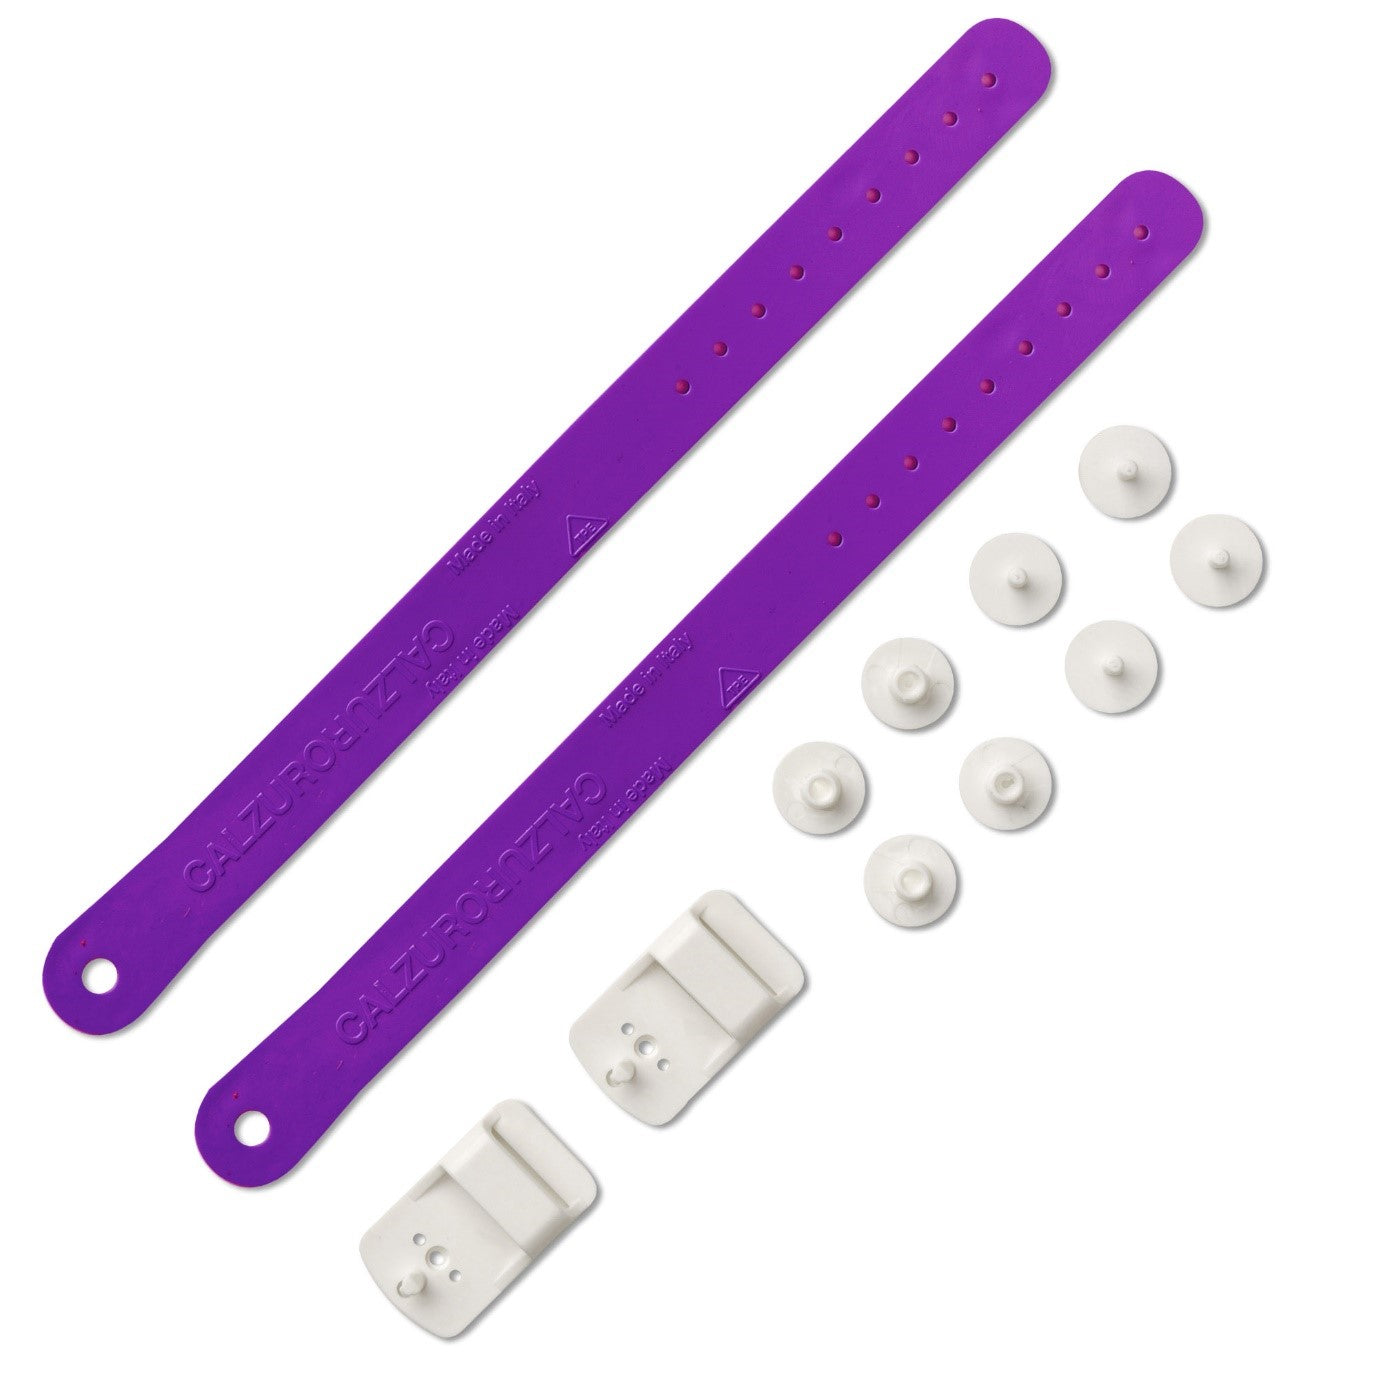 Heel Straps Kit for Calzuro Classic Clogs - Purple